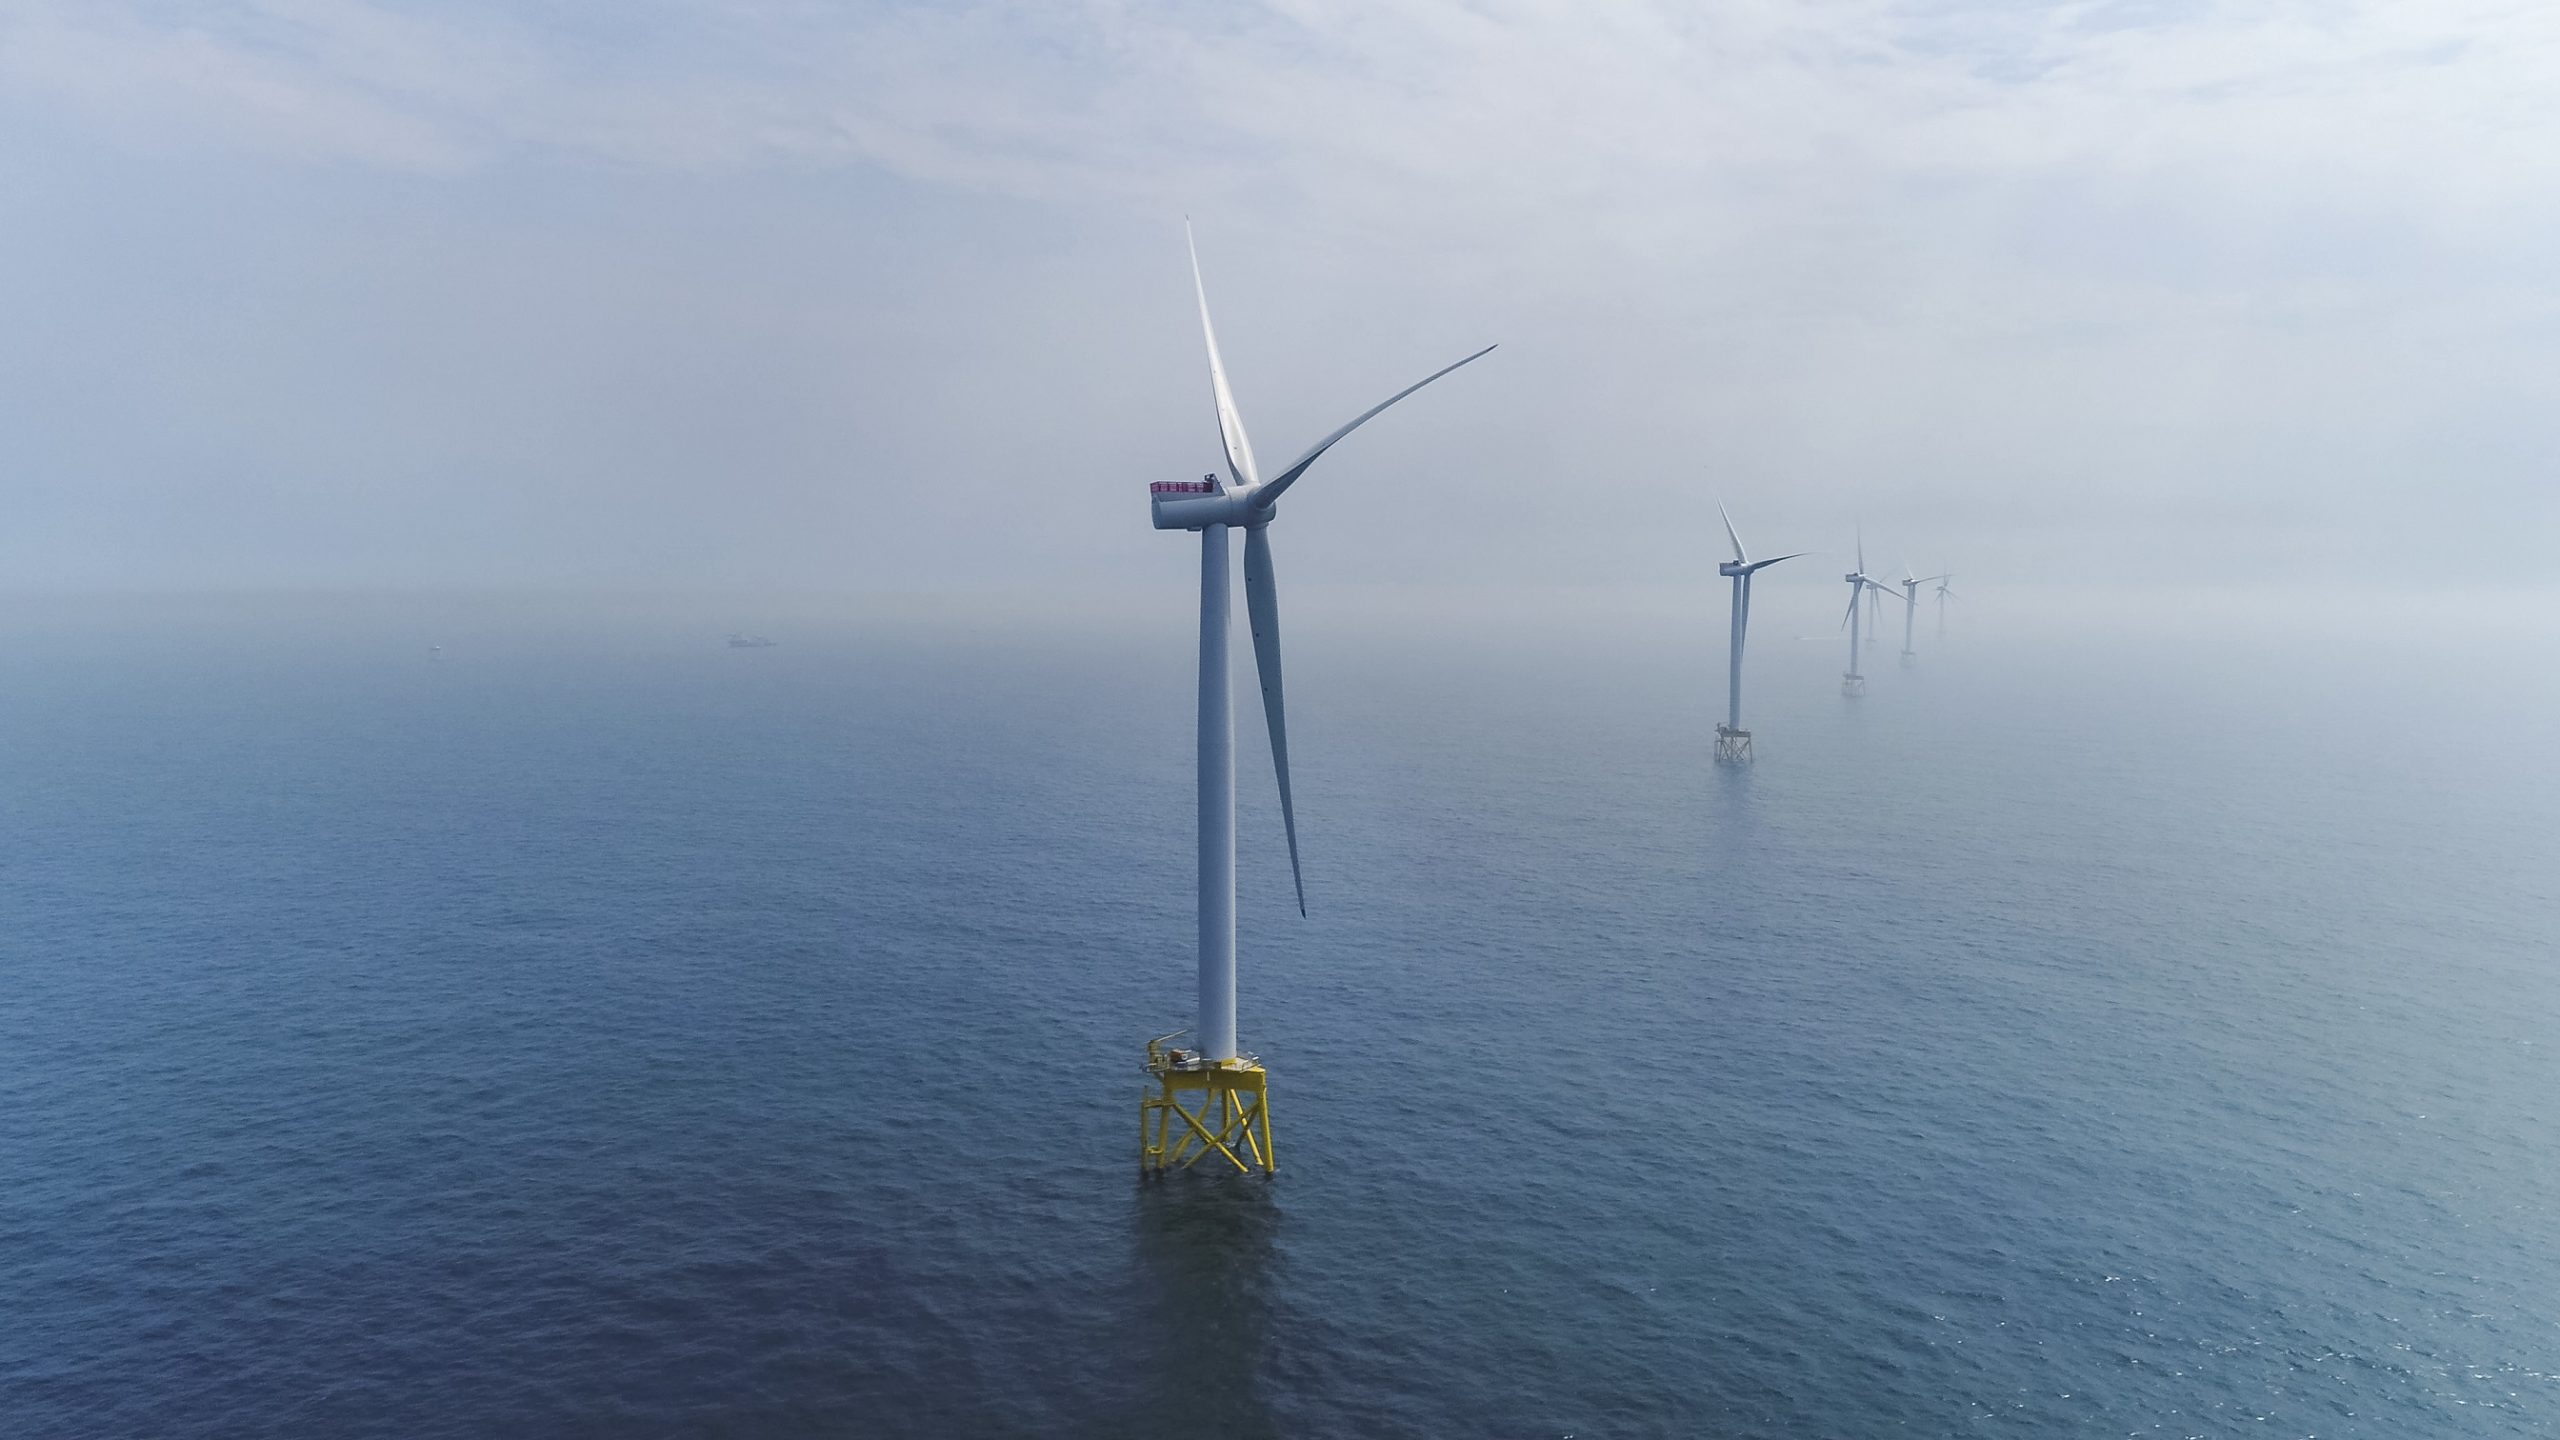 ScottishPower Renewables moves ahead with 714-MW East Anglia ONE offshore wind farm - Renewable Energy World